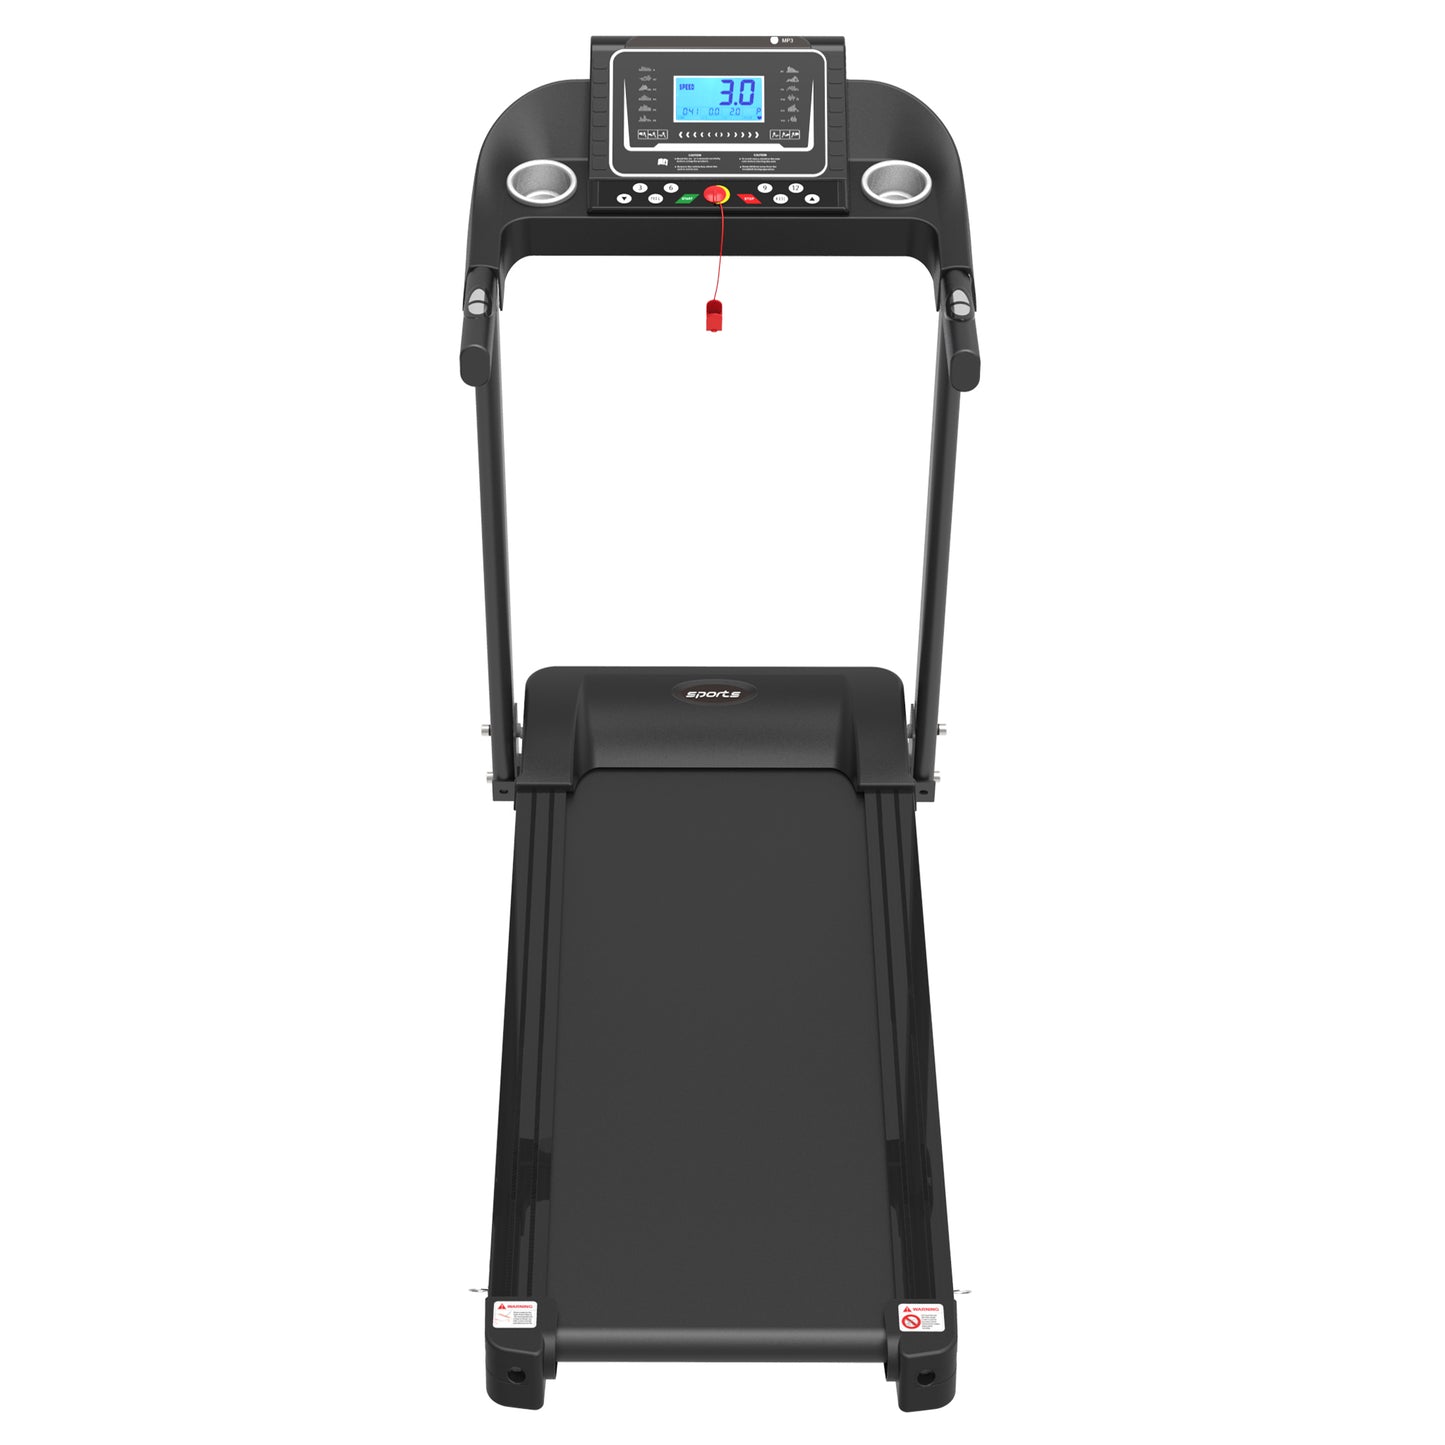 Folding Treadmill, Smart Motorized Treadmill with Manual Incline and Air Spring  MP3, Exercise Running Machine with 5& LCD Display for Home Use